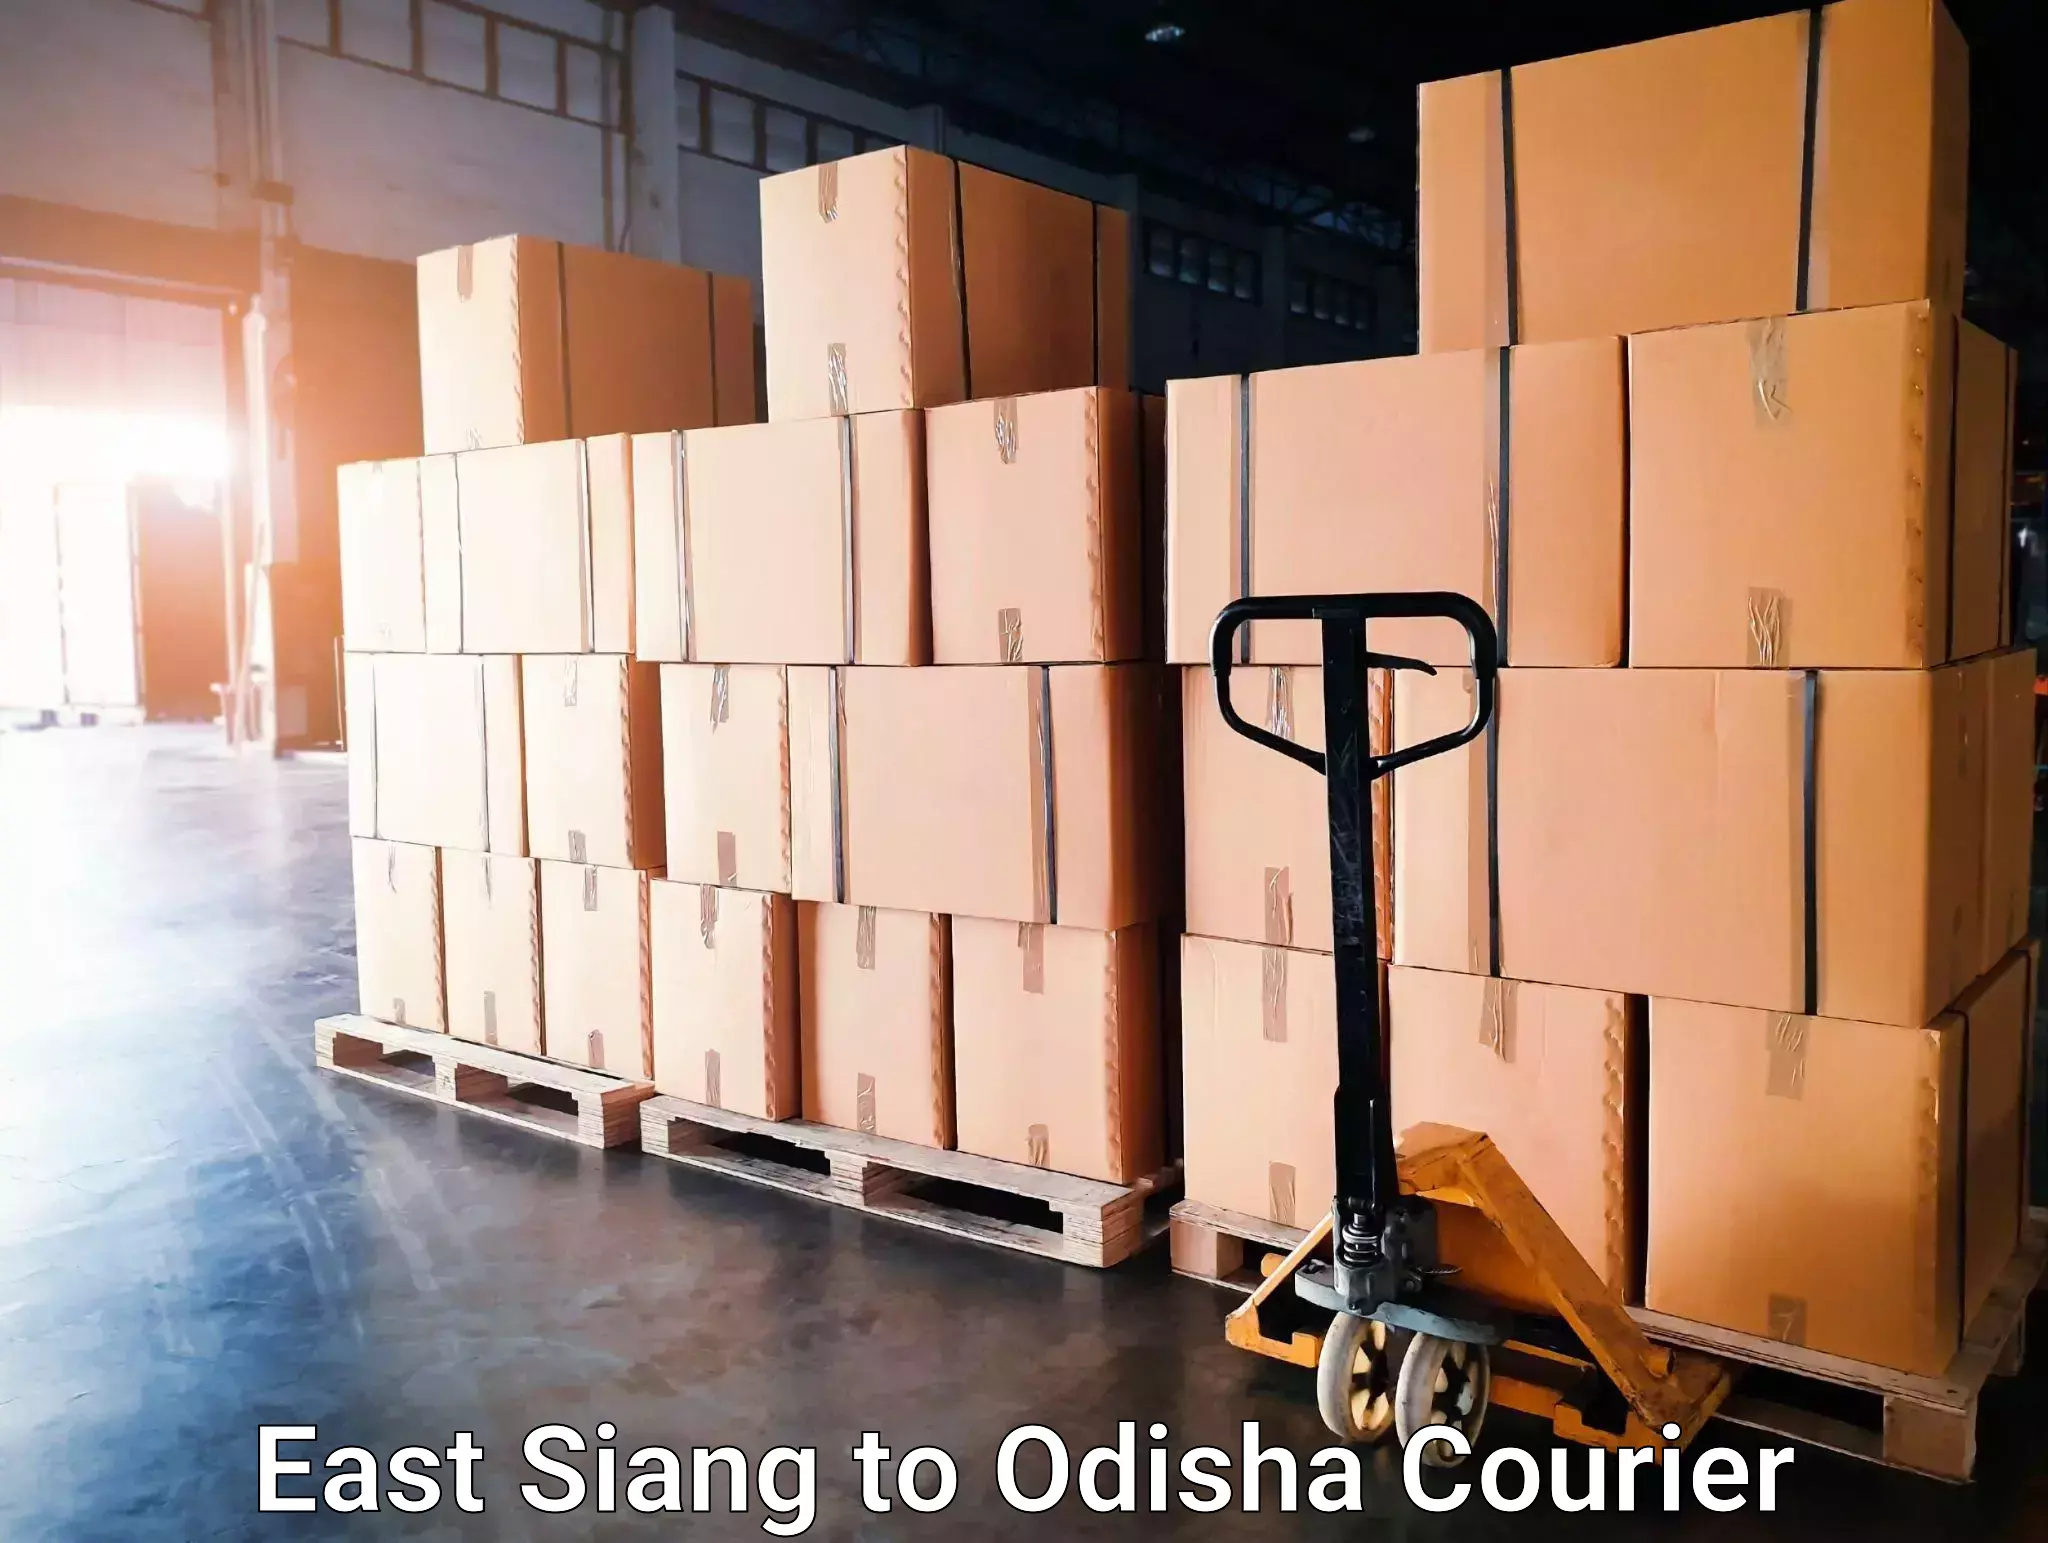 Nationwide courier service East Siang to Chandinchowk